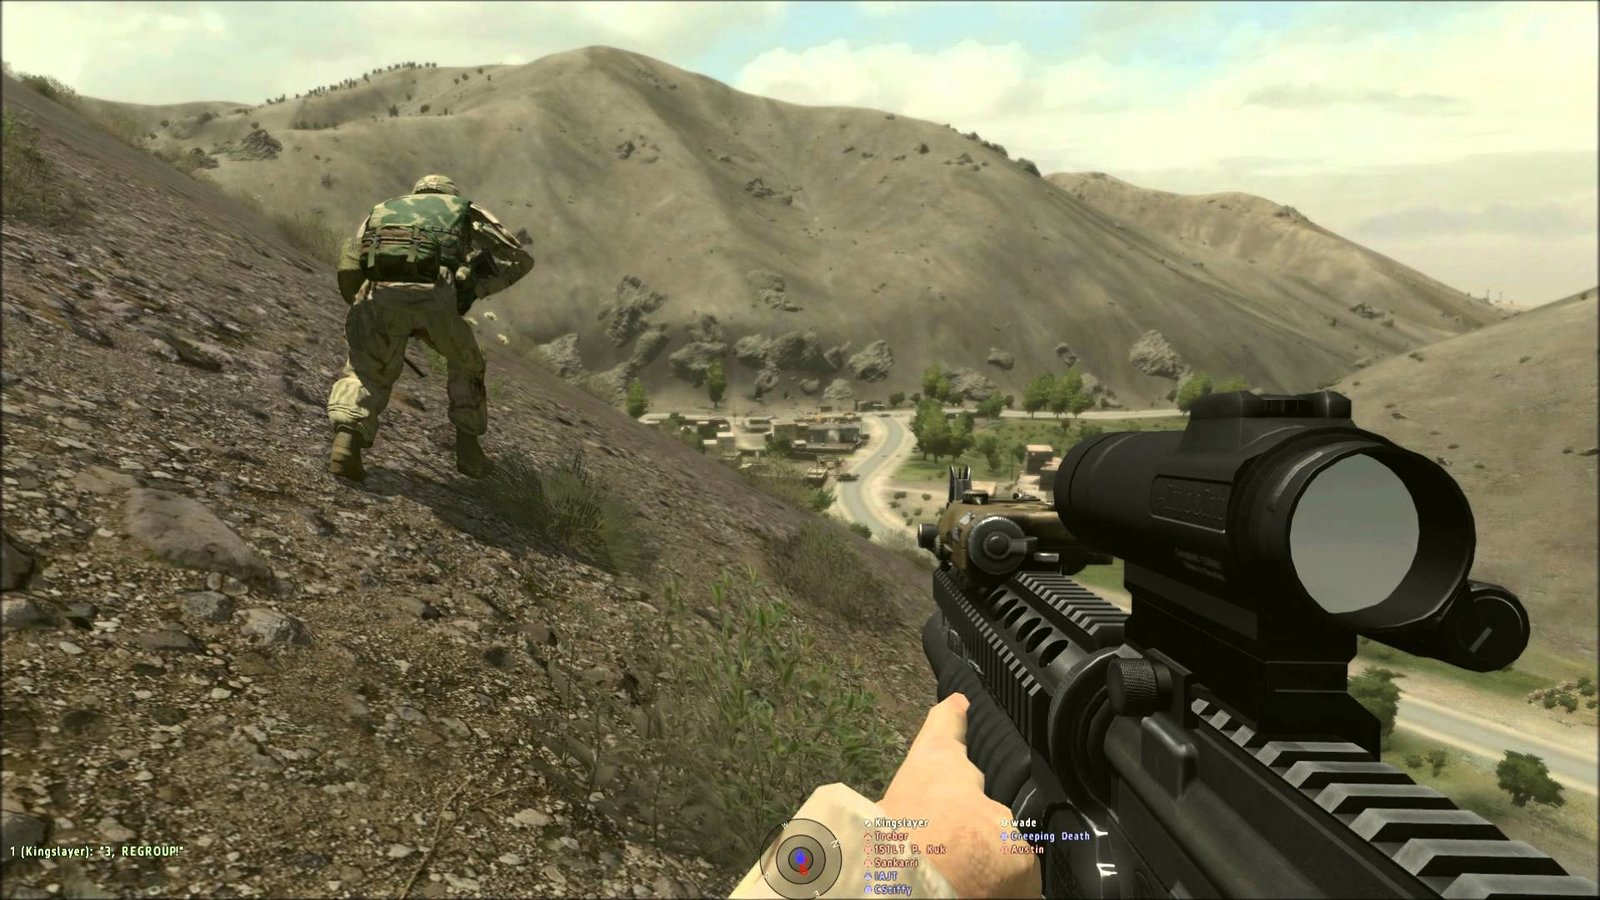 Arma 2: Combined Operations